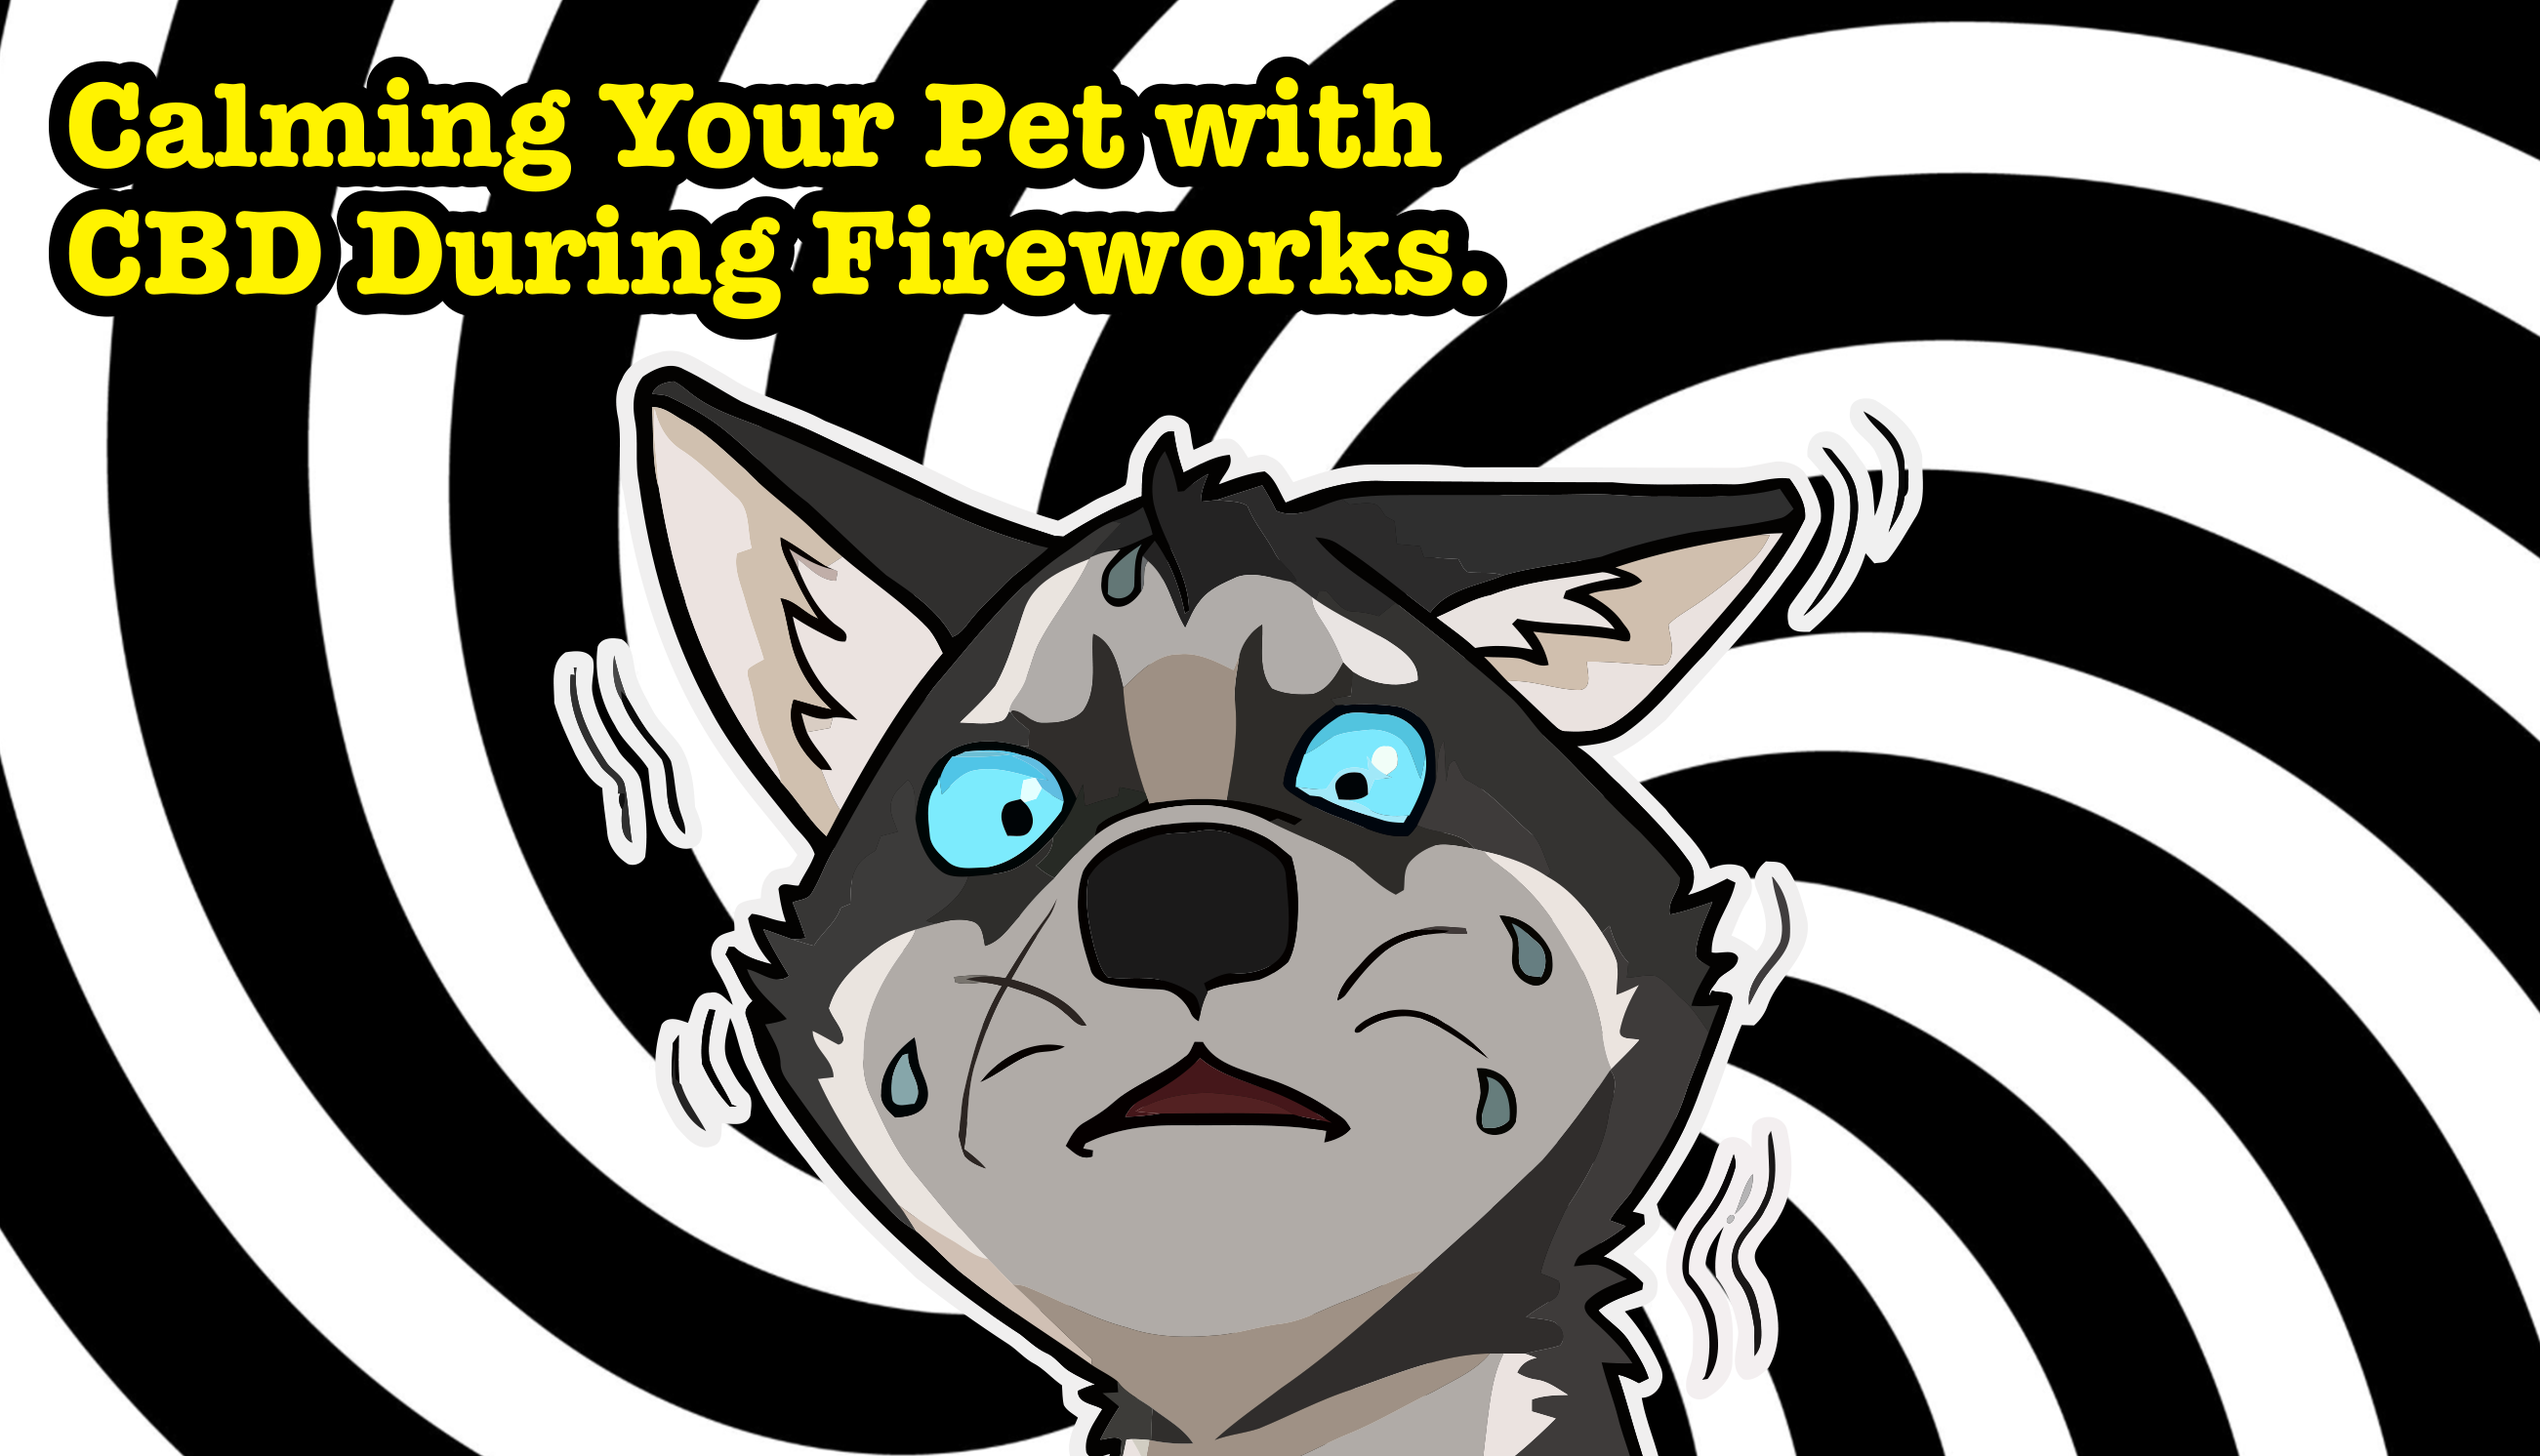 Calming your Pet With CBD During Fireworks